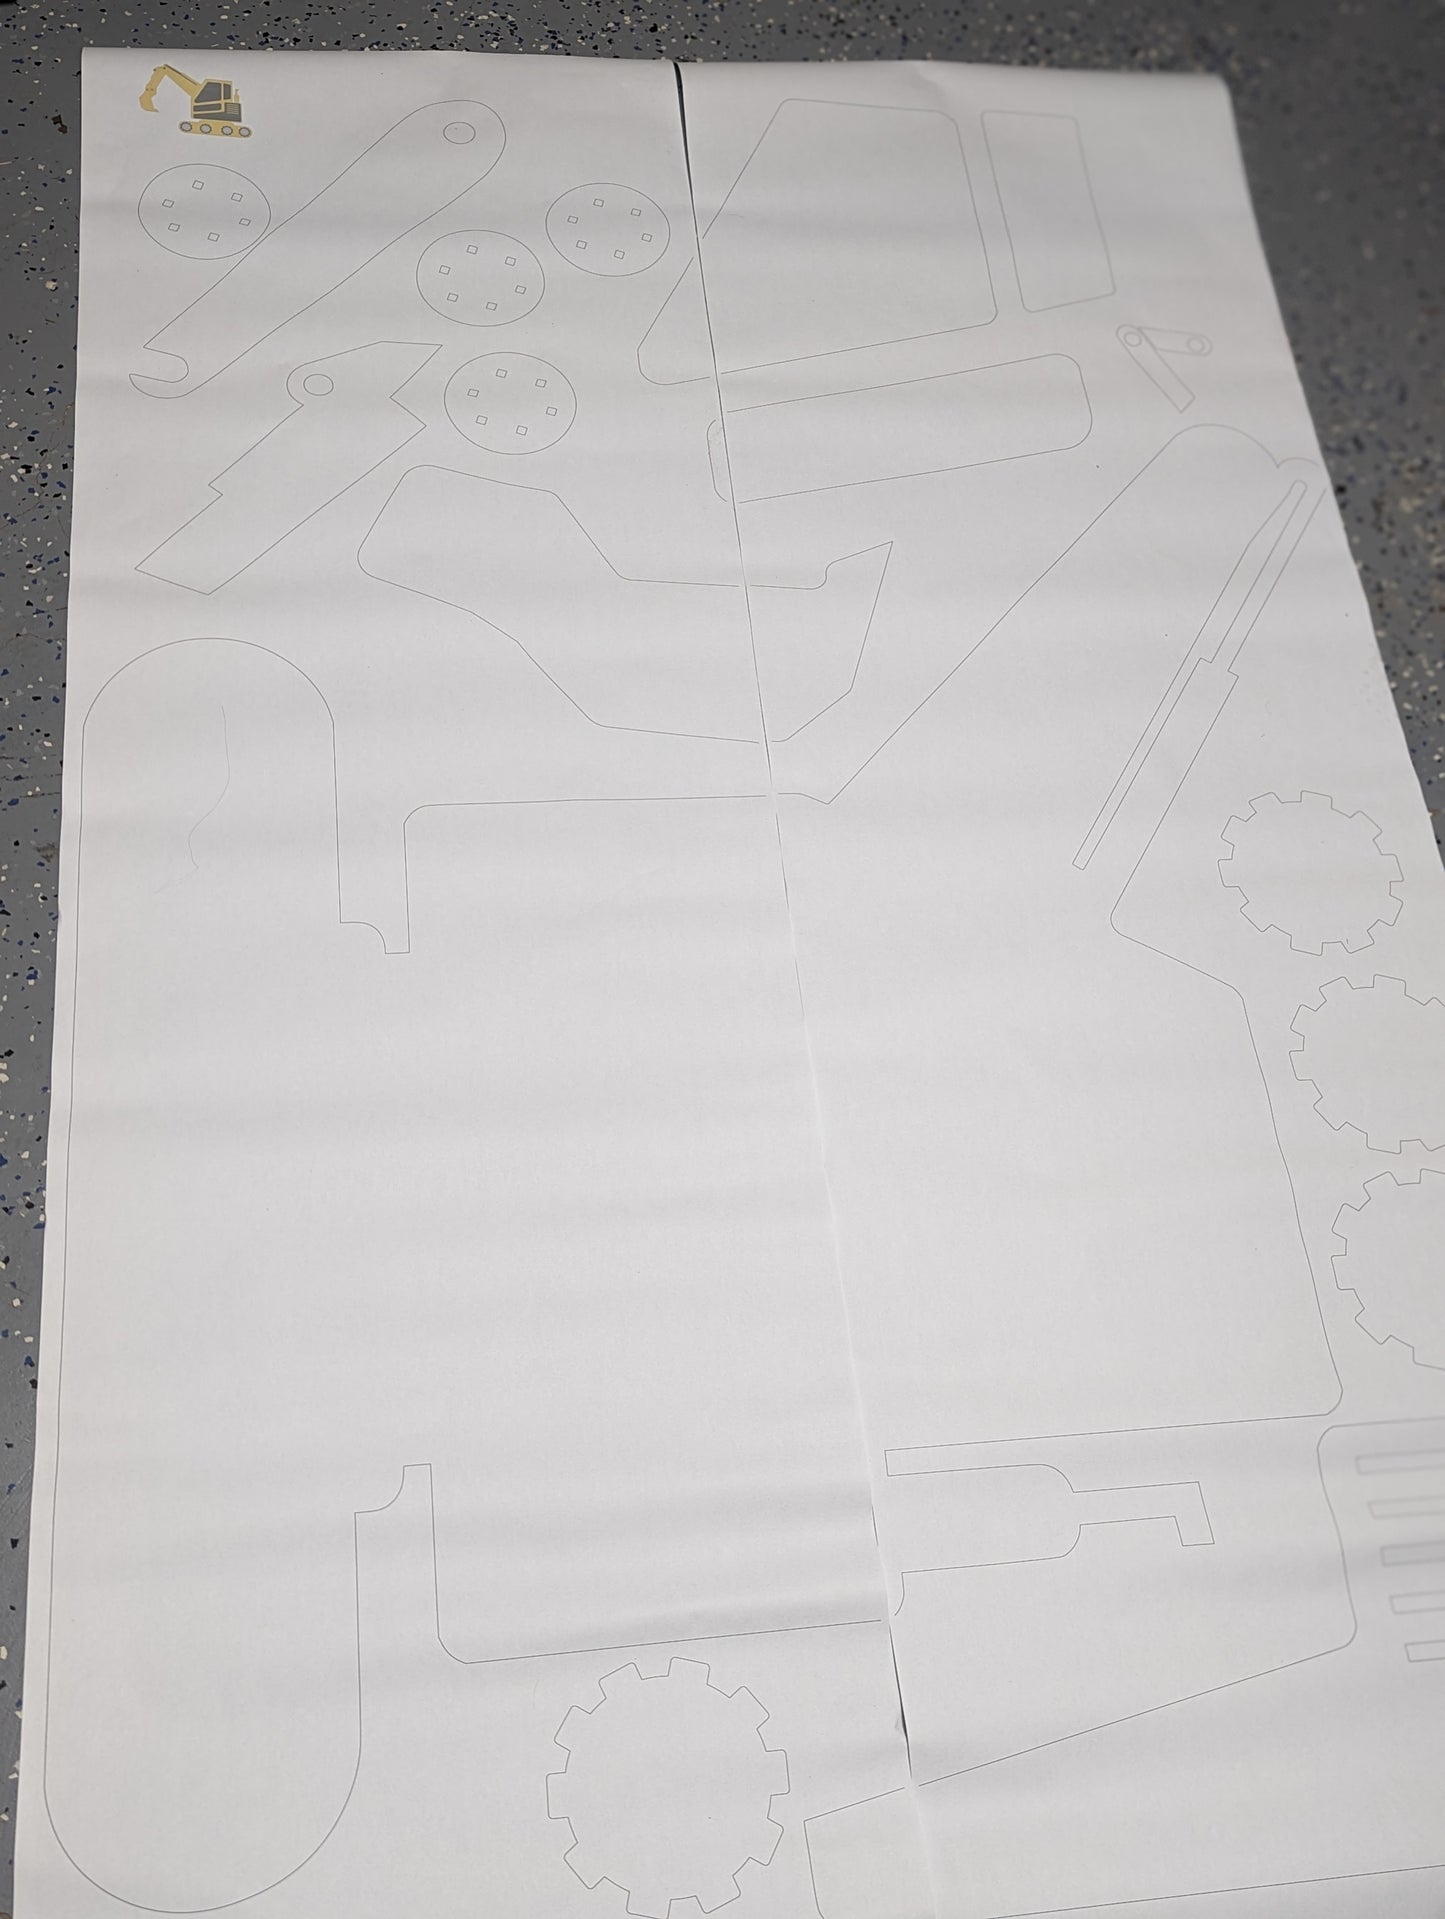 Excavator Paper Stencil Template 3ft Tall and 4ft Tall.